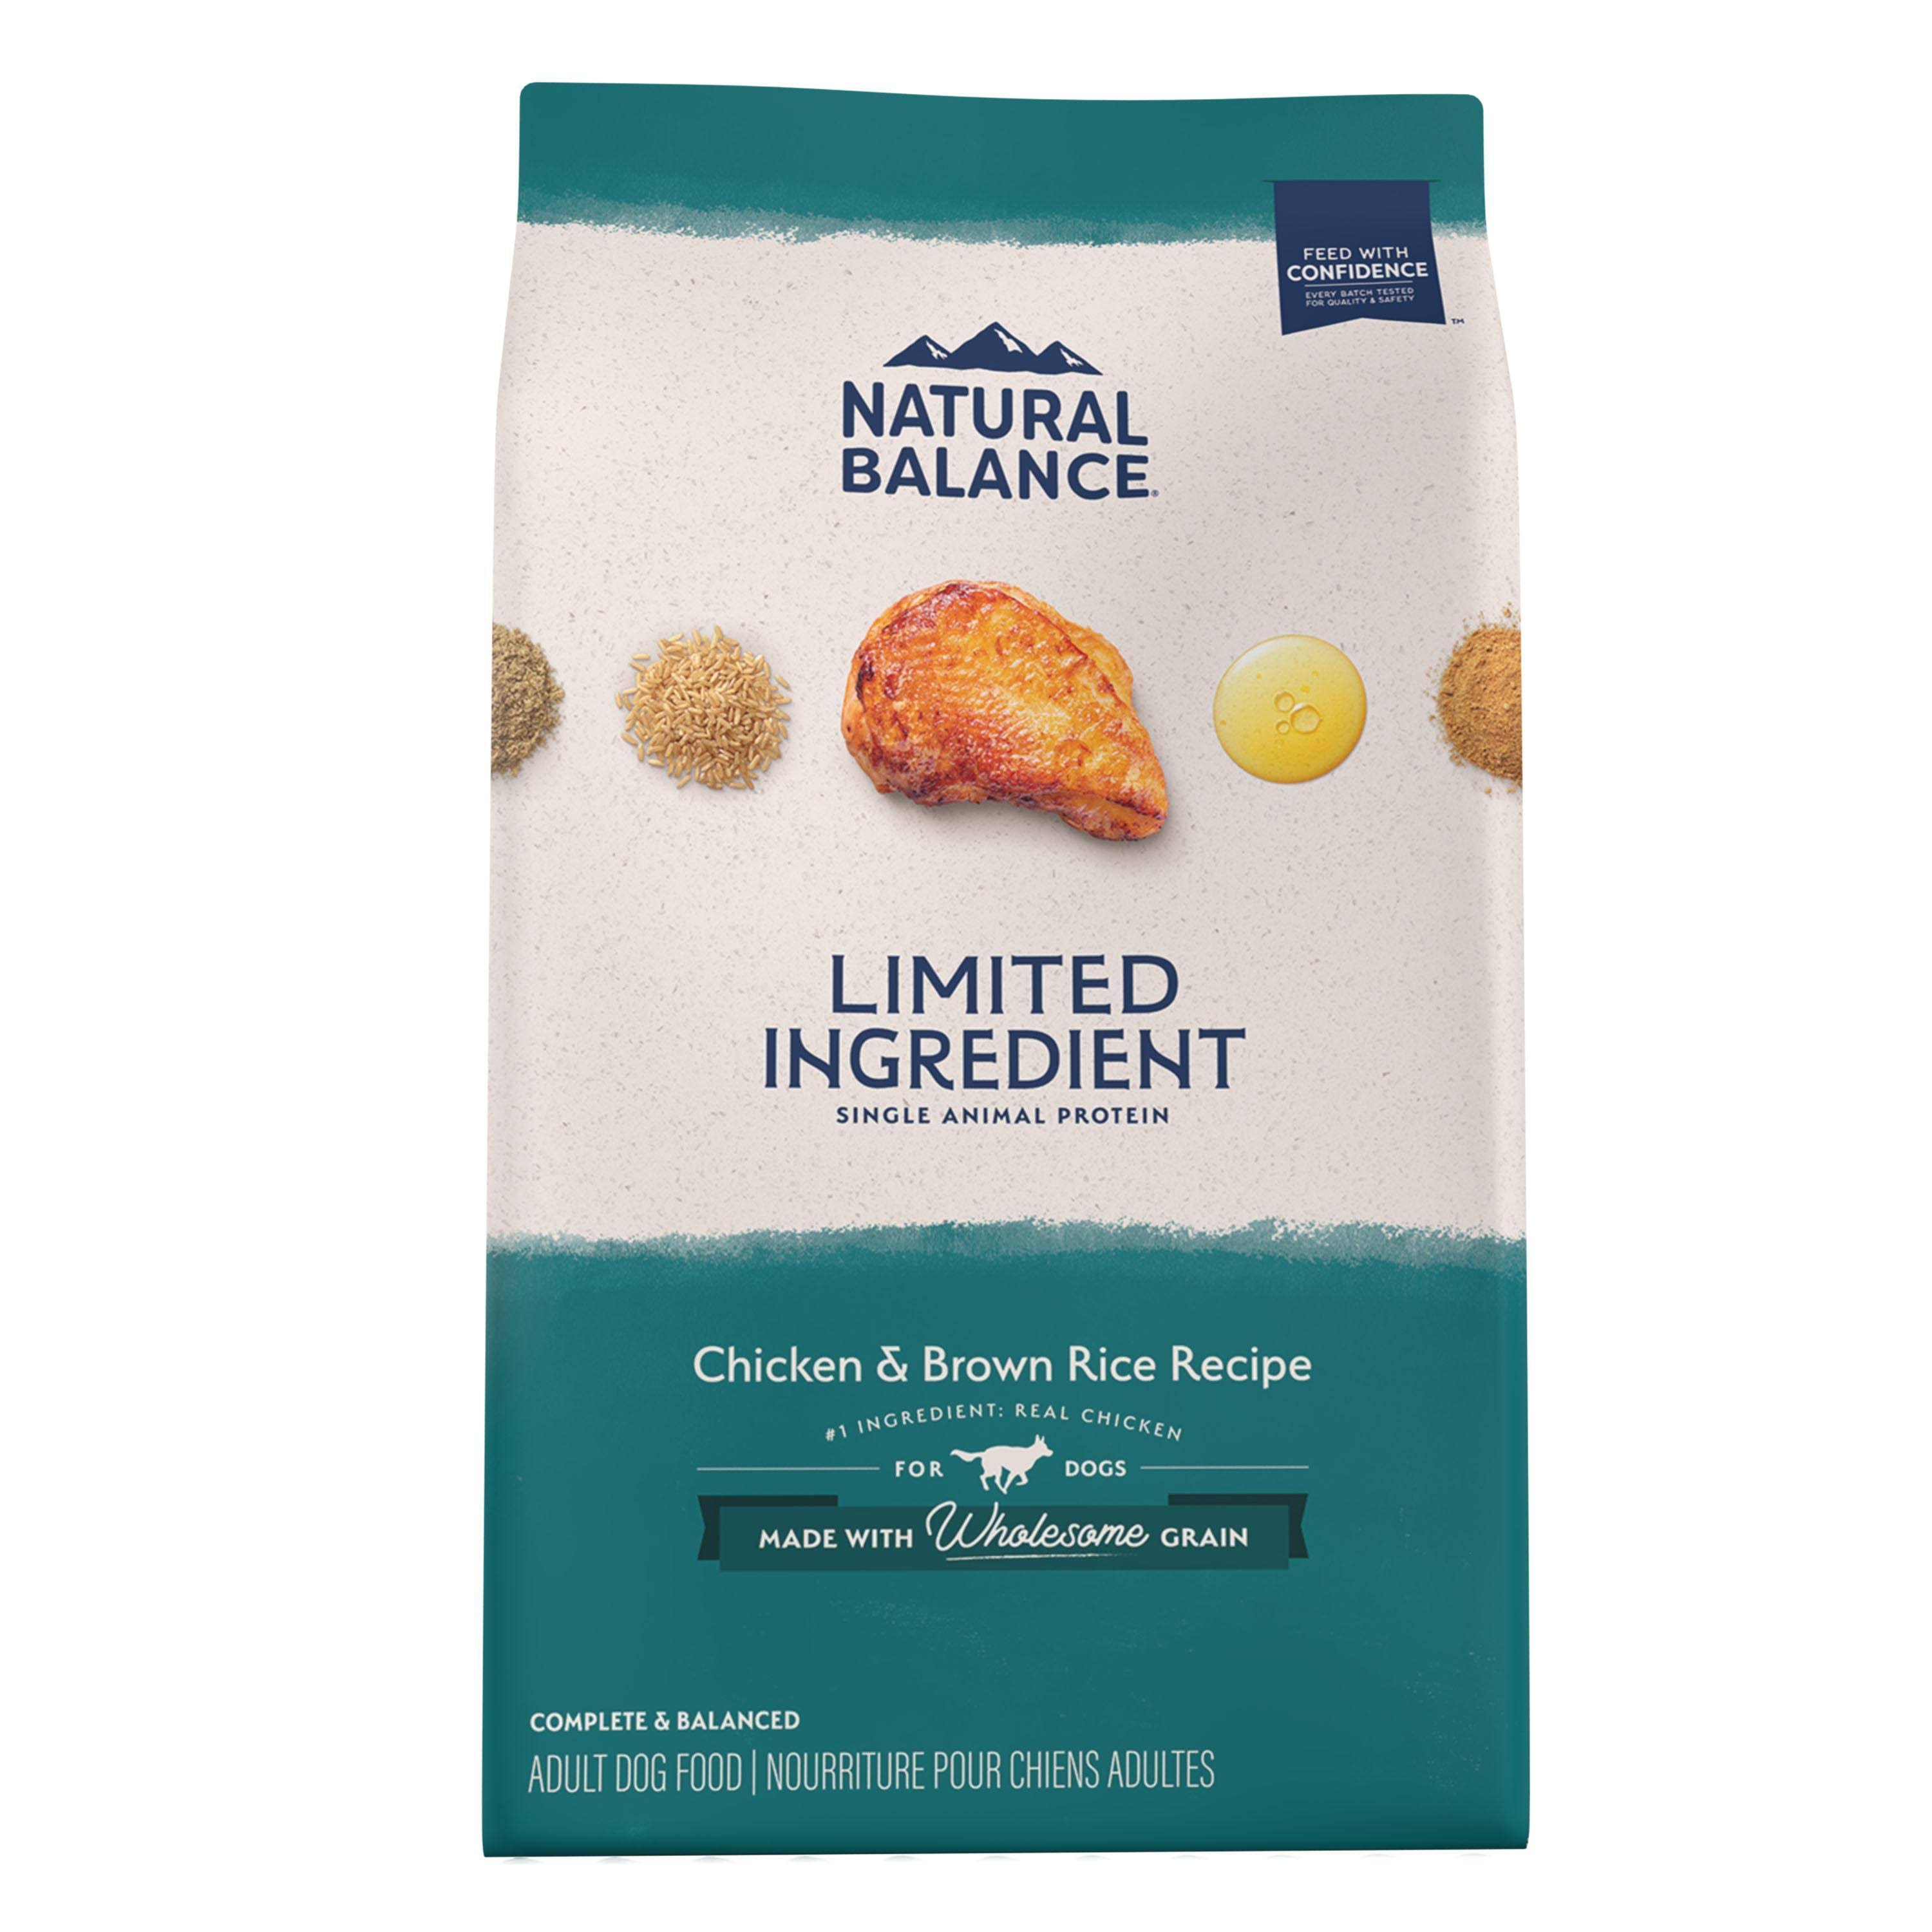 Natural Balance Limited Ingredient Chicken & Brown Rice Recipe Dry Dog Food 24-lb